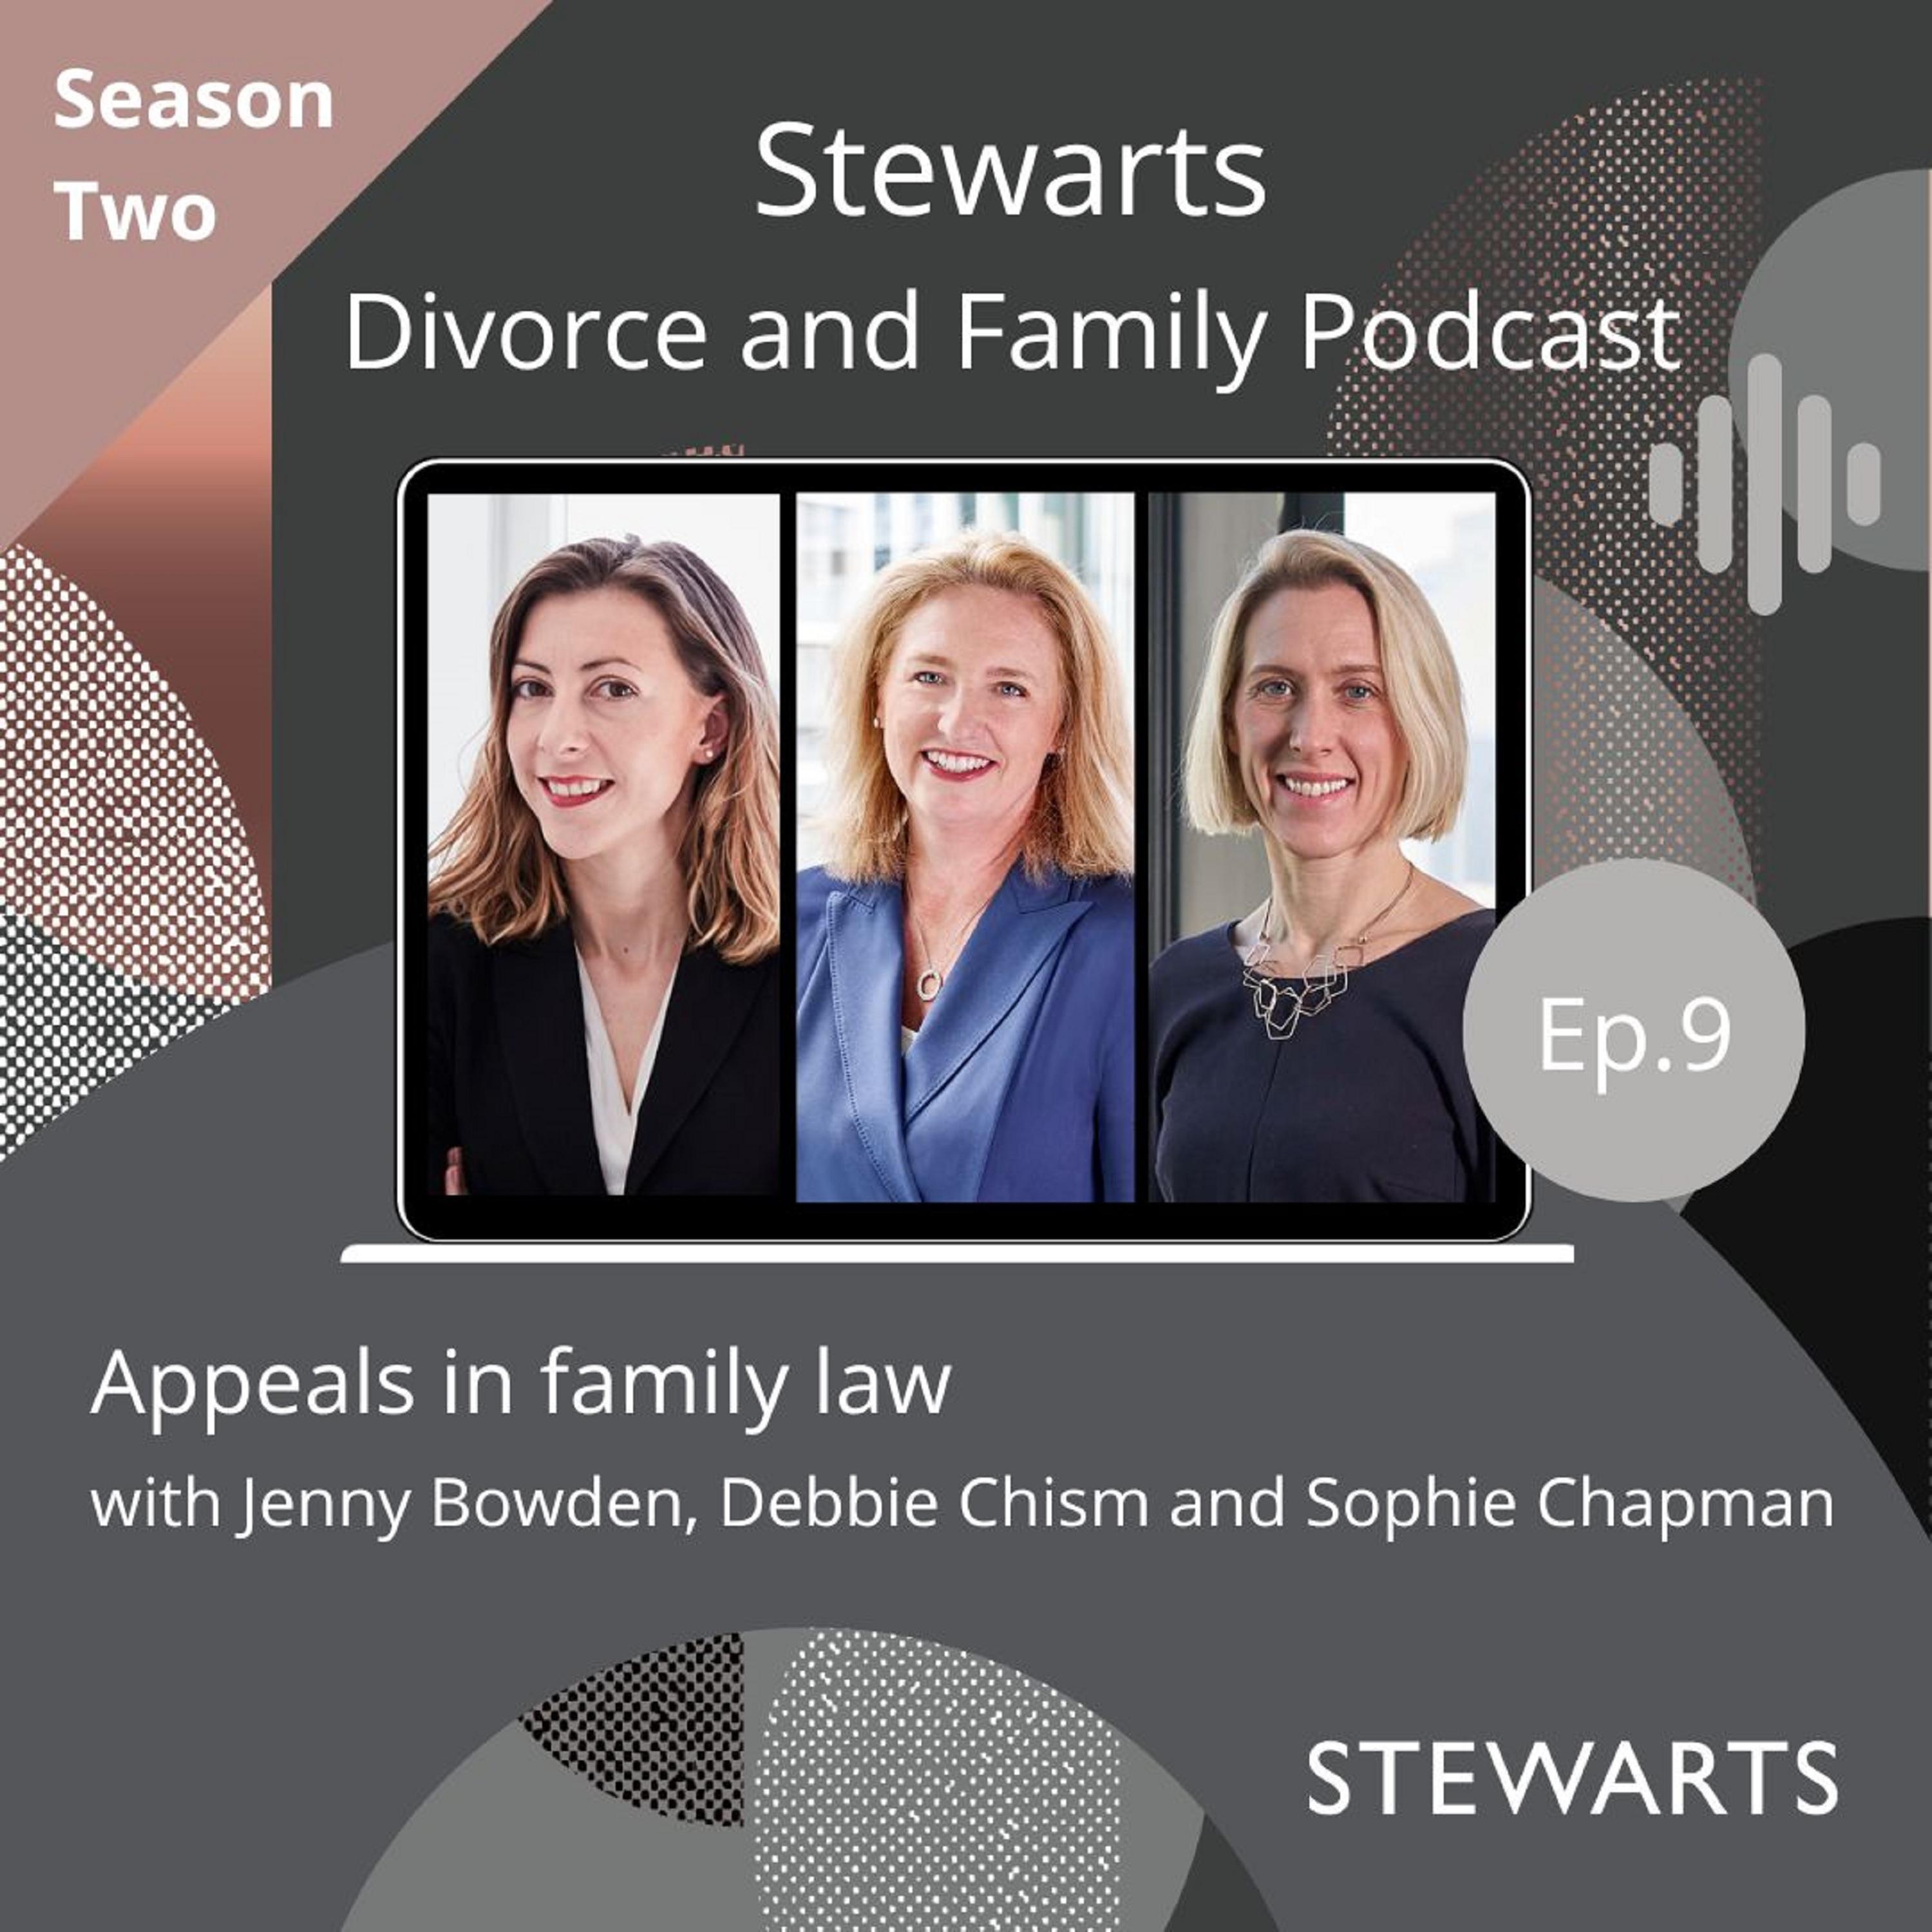 Appeals in family law